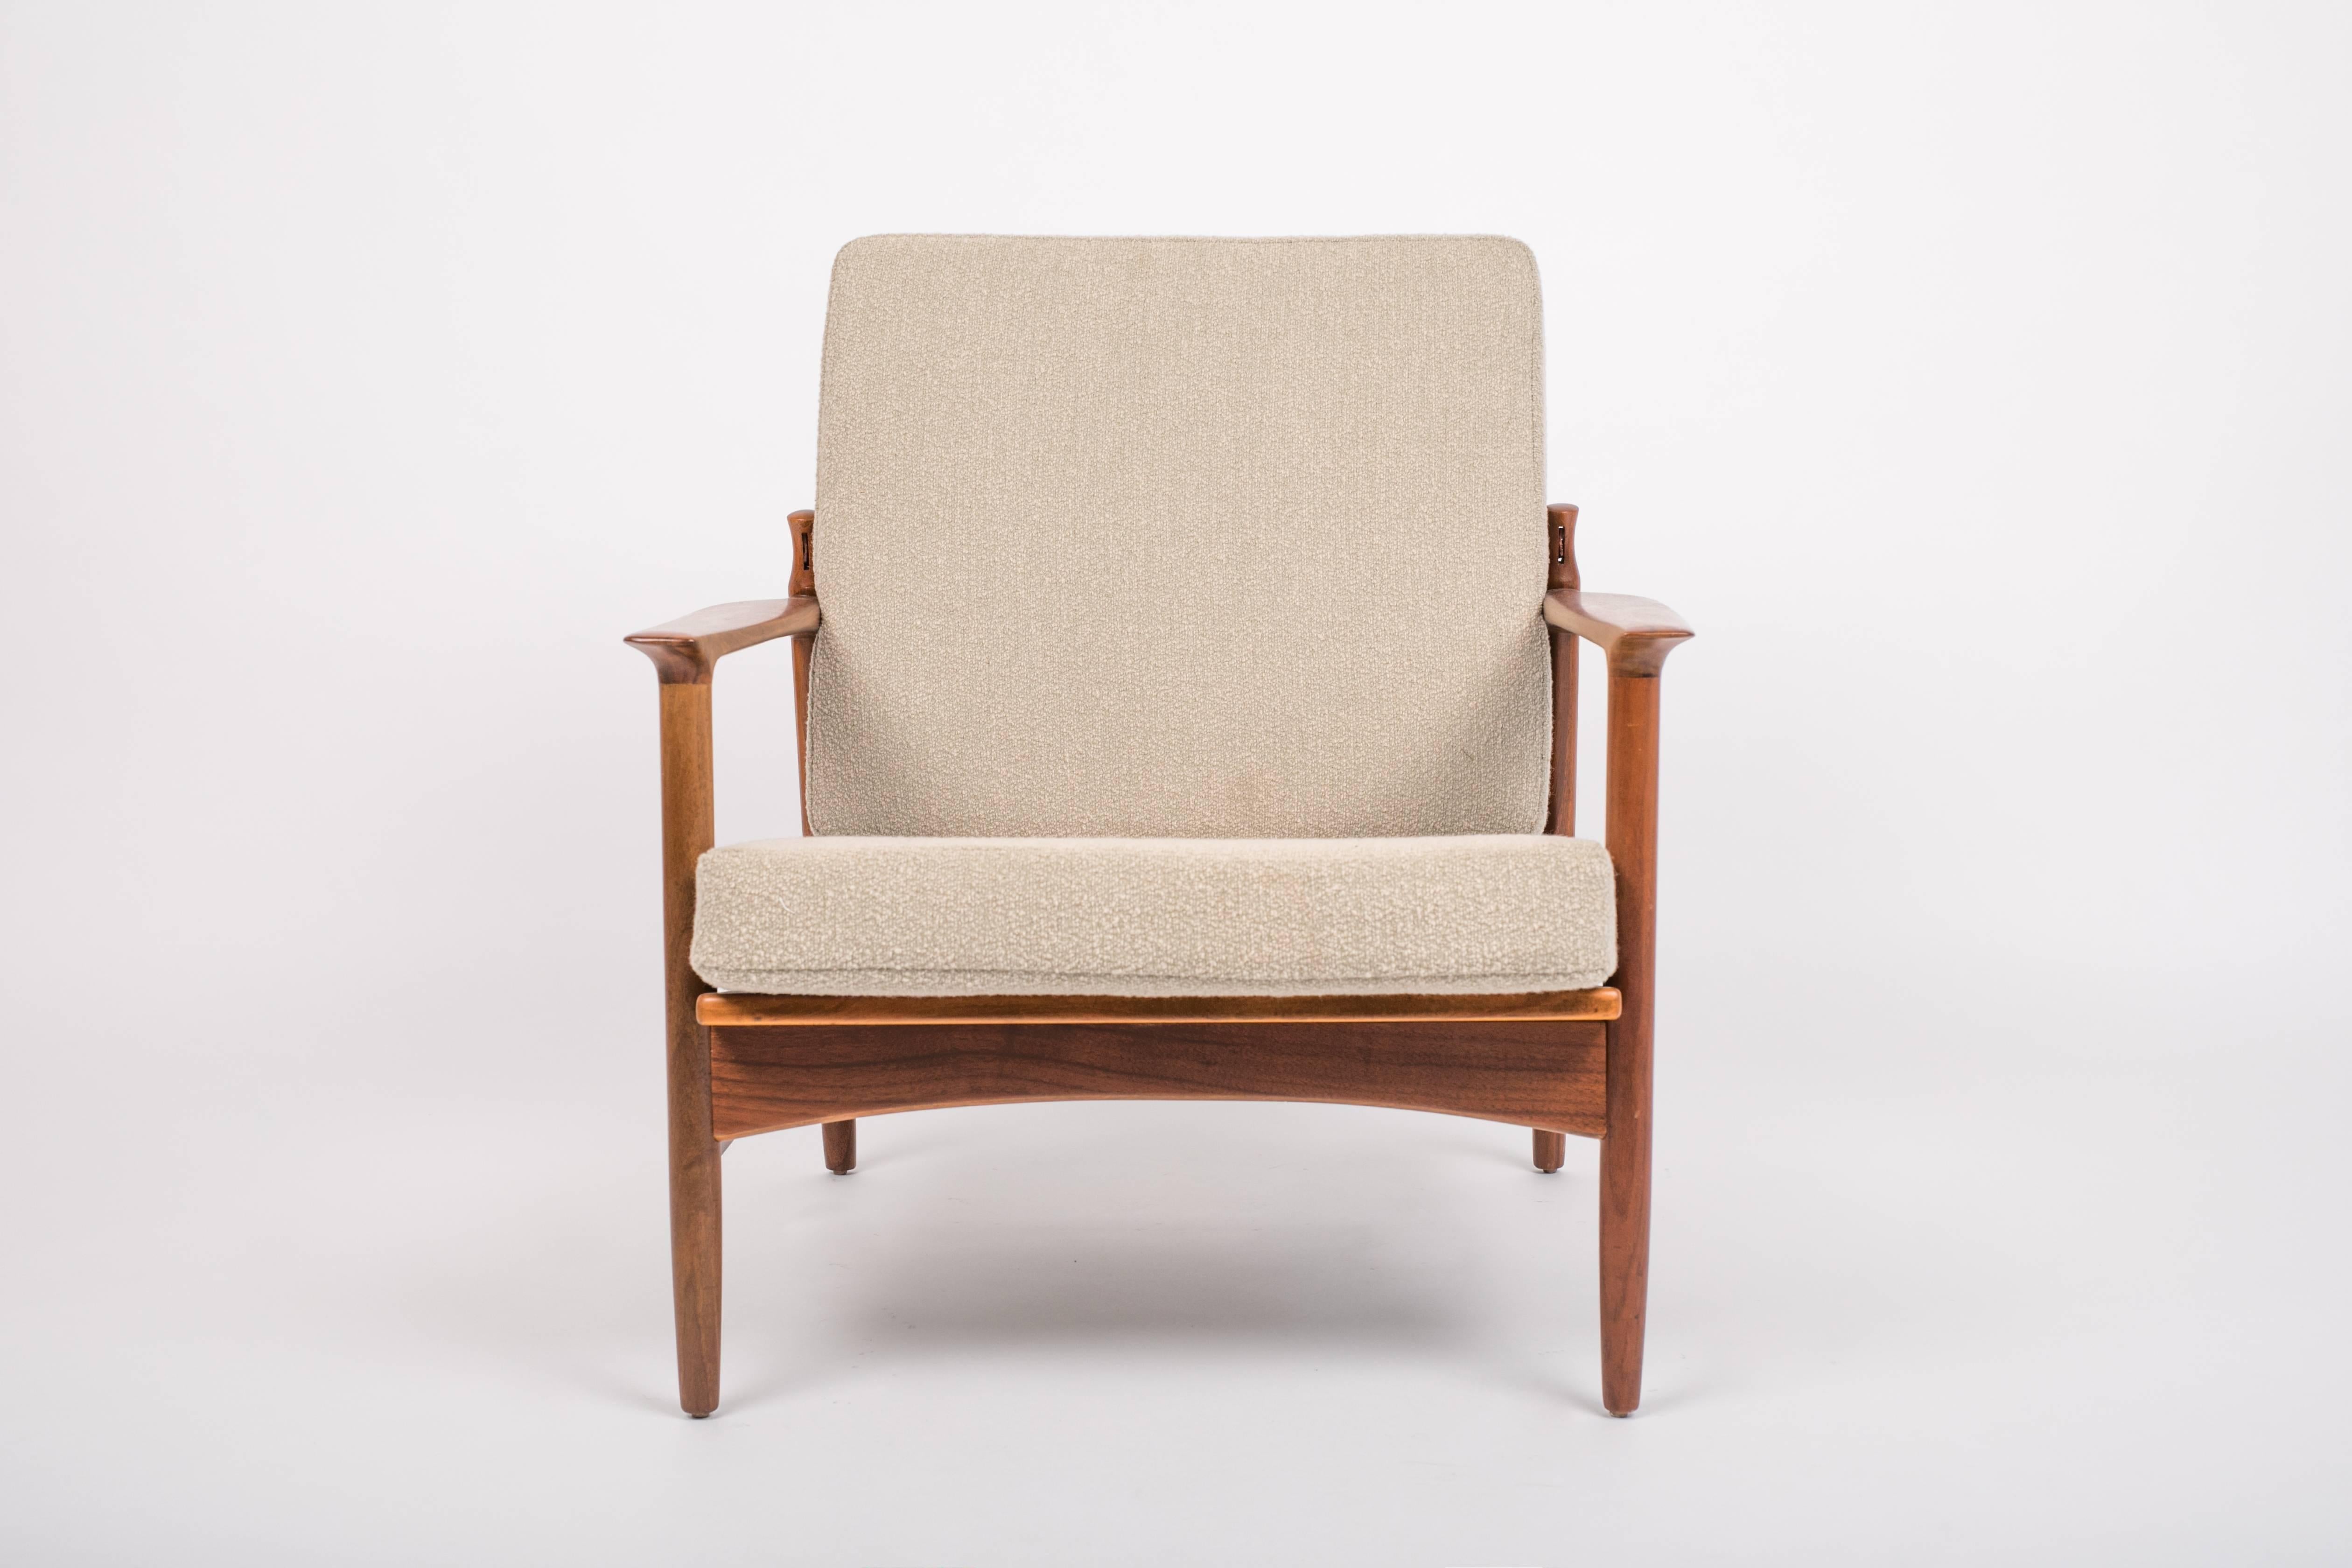 A unusual Ib Kofod Larsen design imported to the US by Selig has a frame of walnut-stained beech with creamy bouclé cushions. The chair has an adjustable angle of recline, with the backrest attached to the chair frame at leather straps with three